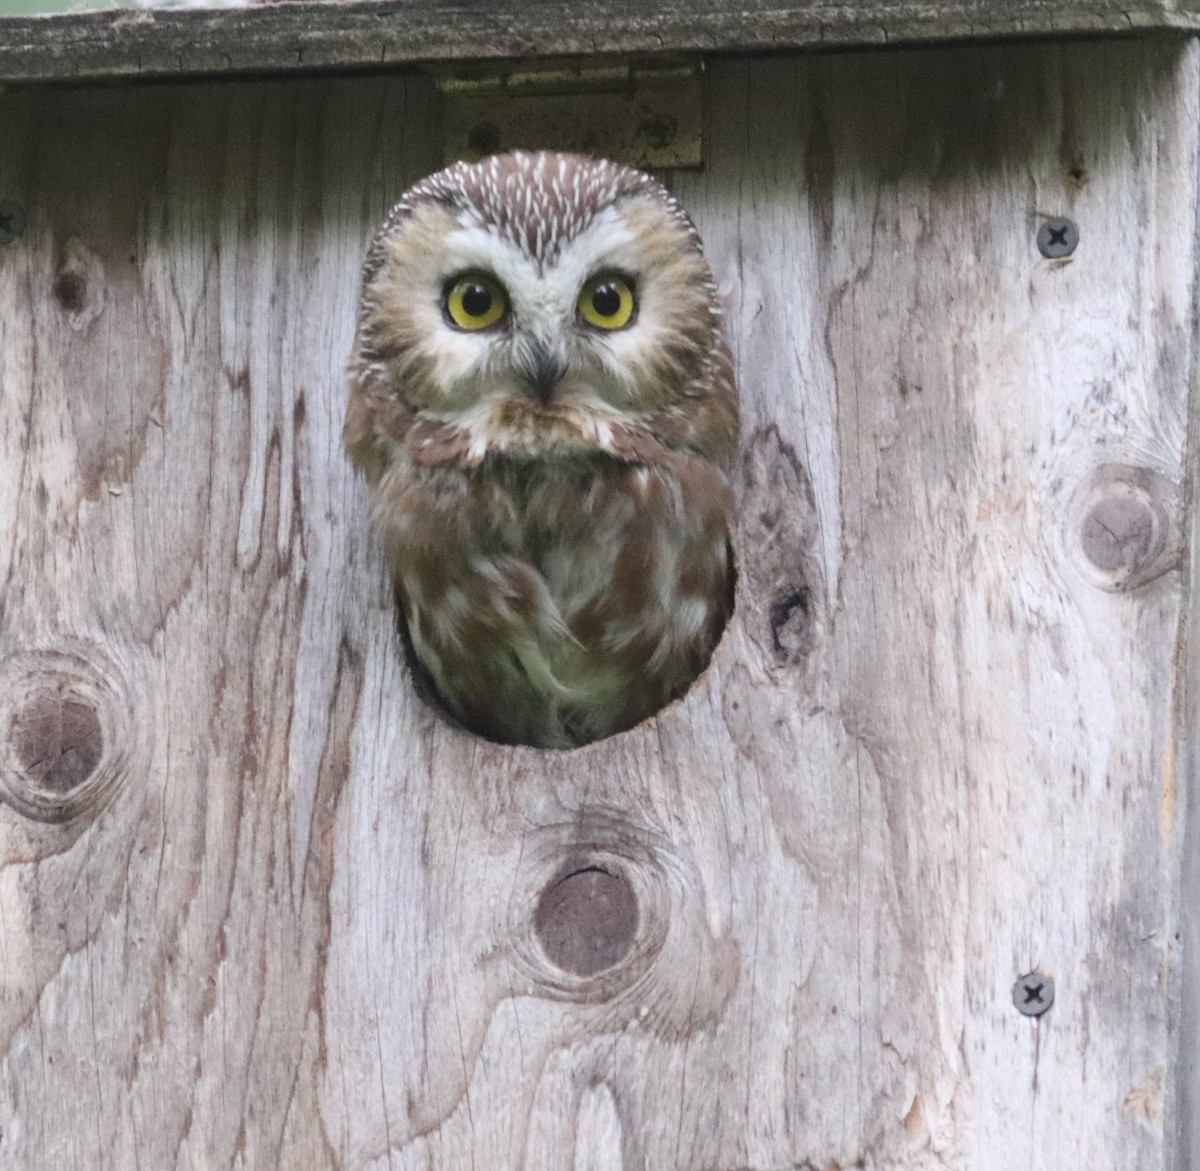 Northern Saw-whet Owl - Daphne Asbell